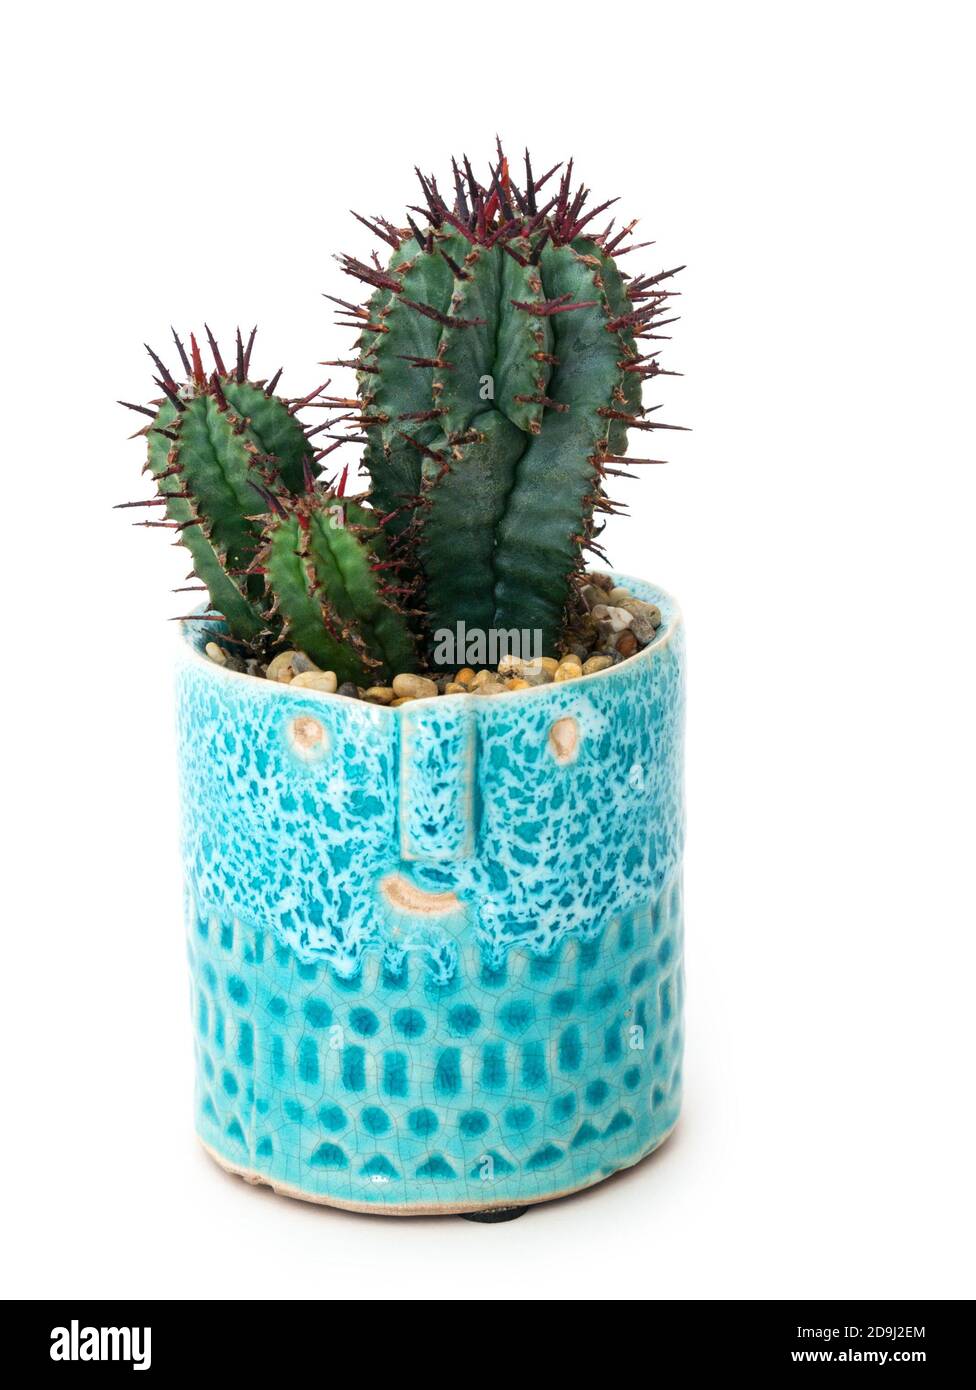 Small cactus with spikes in novelty face plant pot Stock Photo